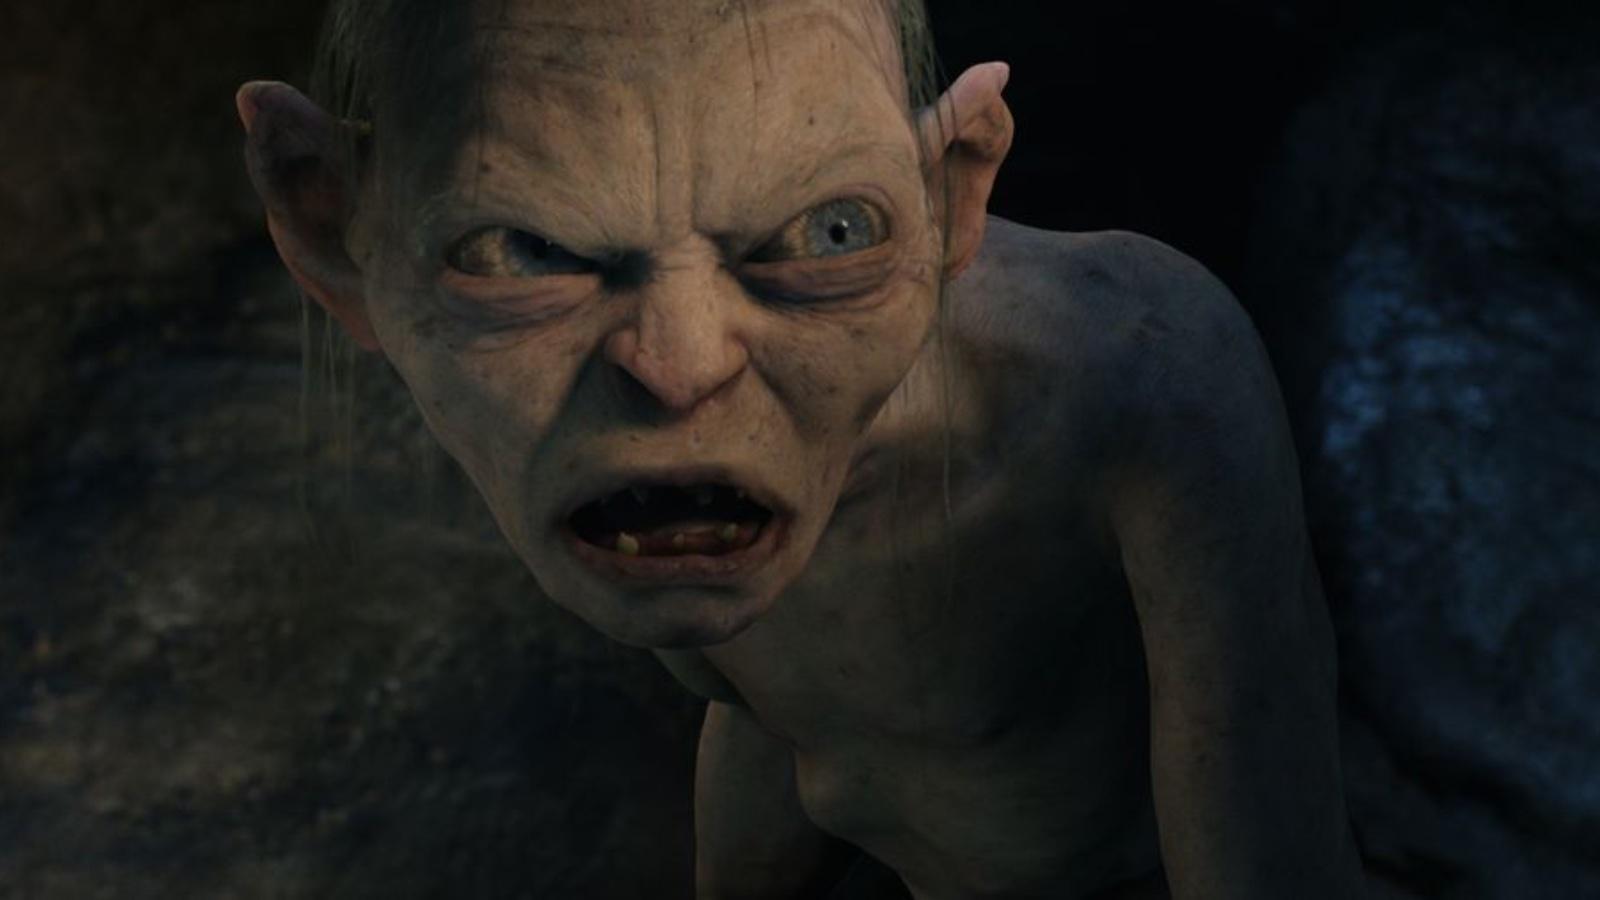 Andy Serkis as Gollum in Lord of the Rings